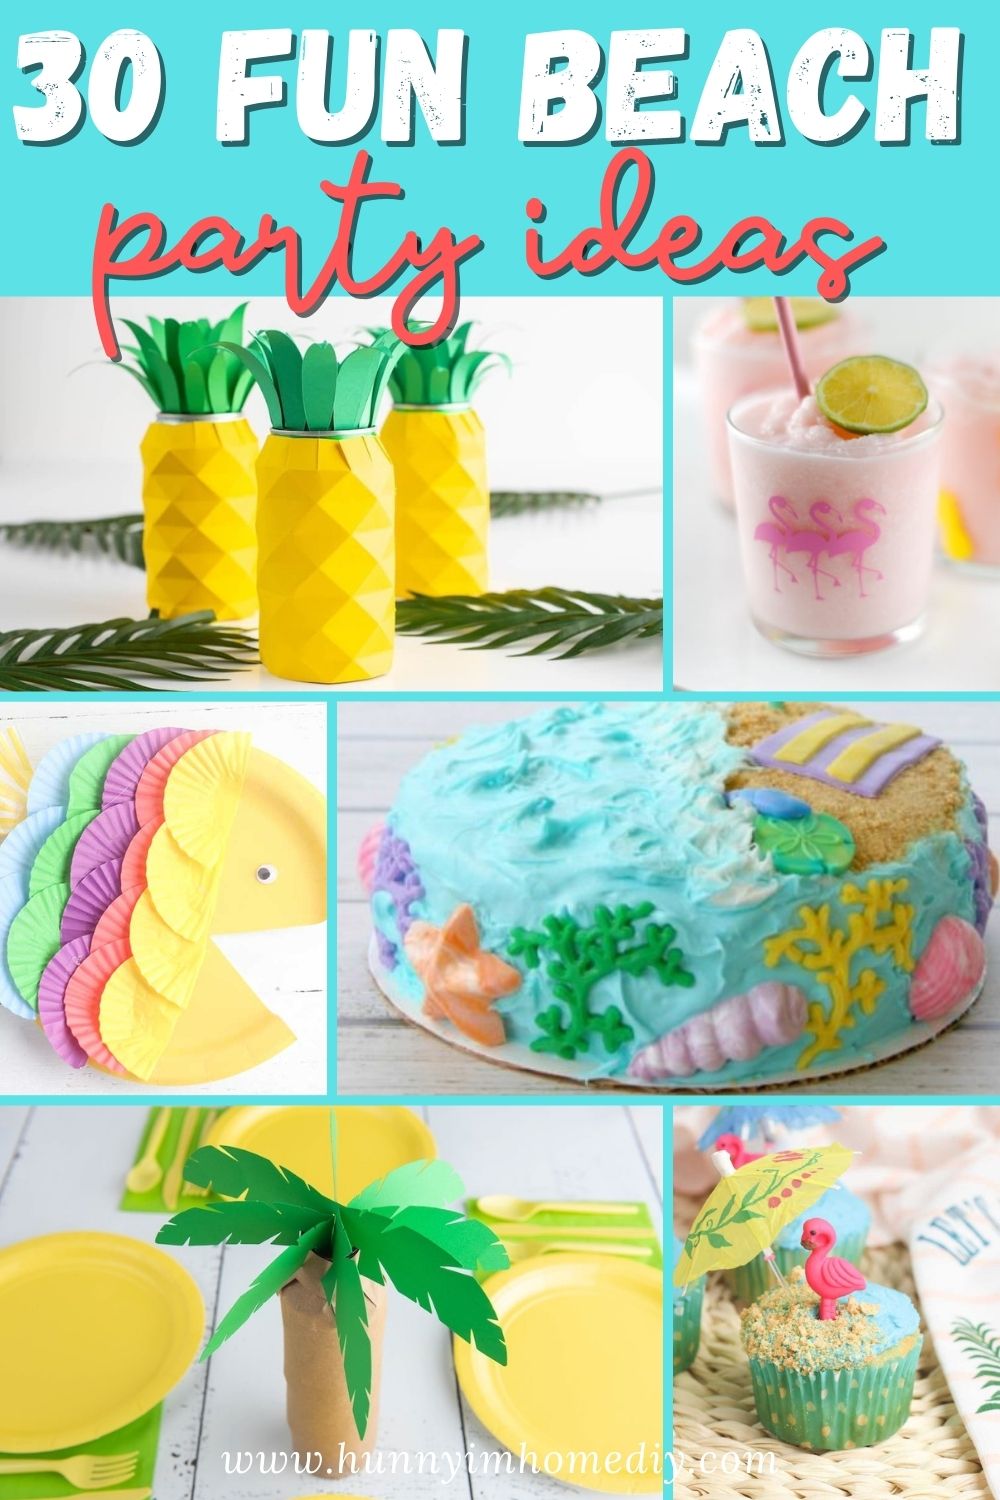 33 Fun Beach Party Ideas You're Going to Love